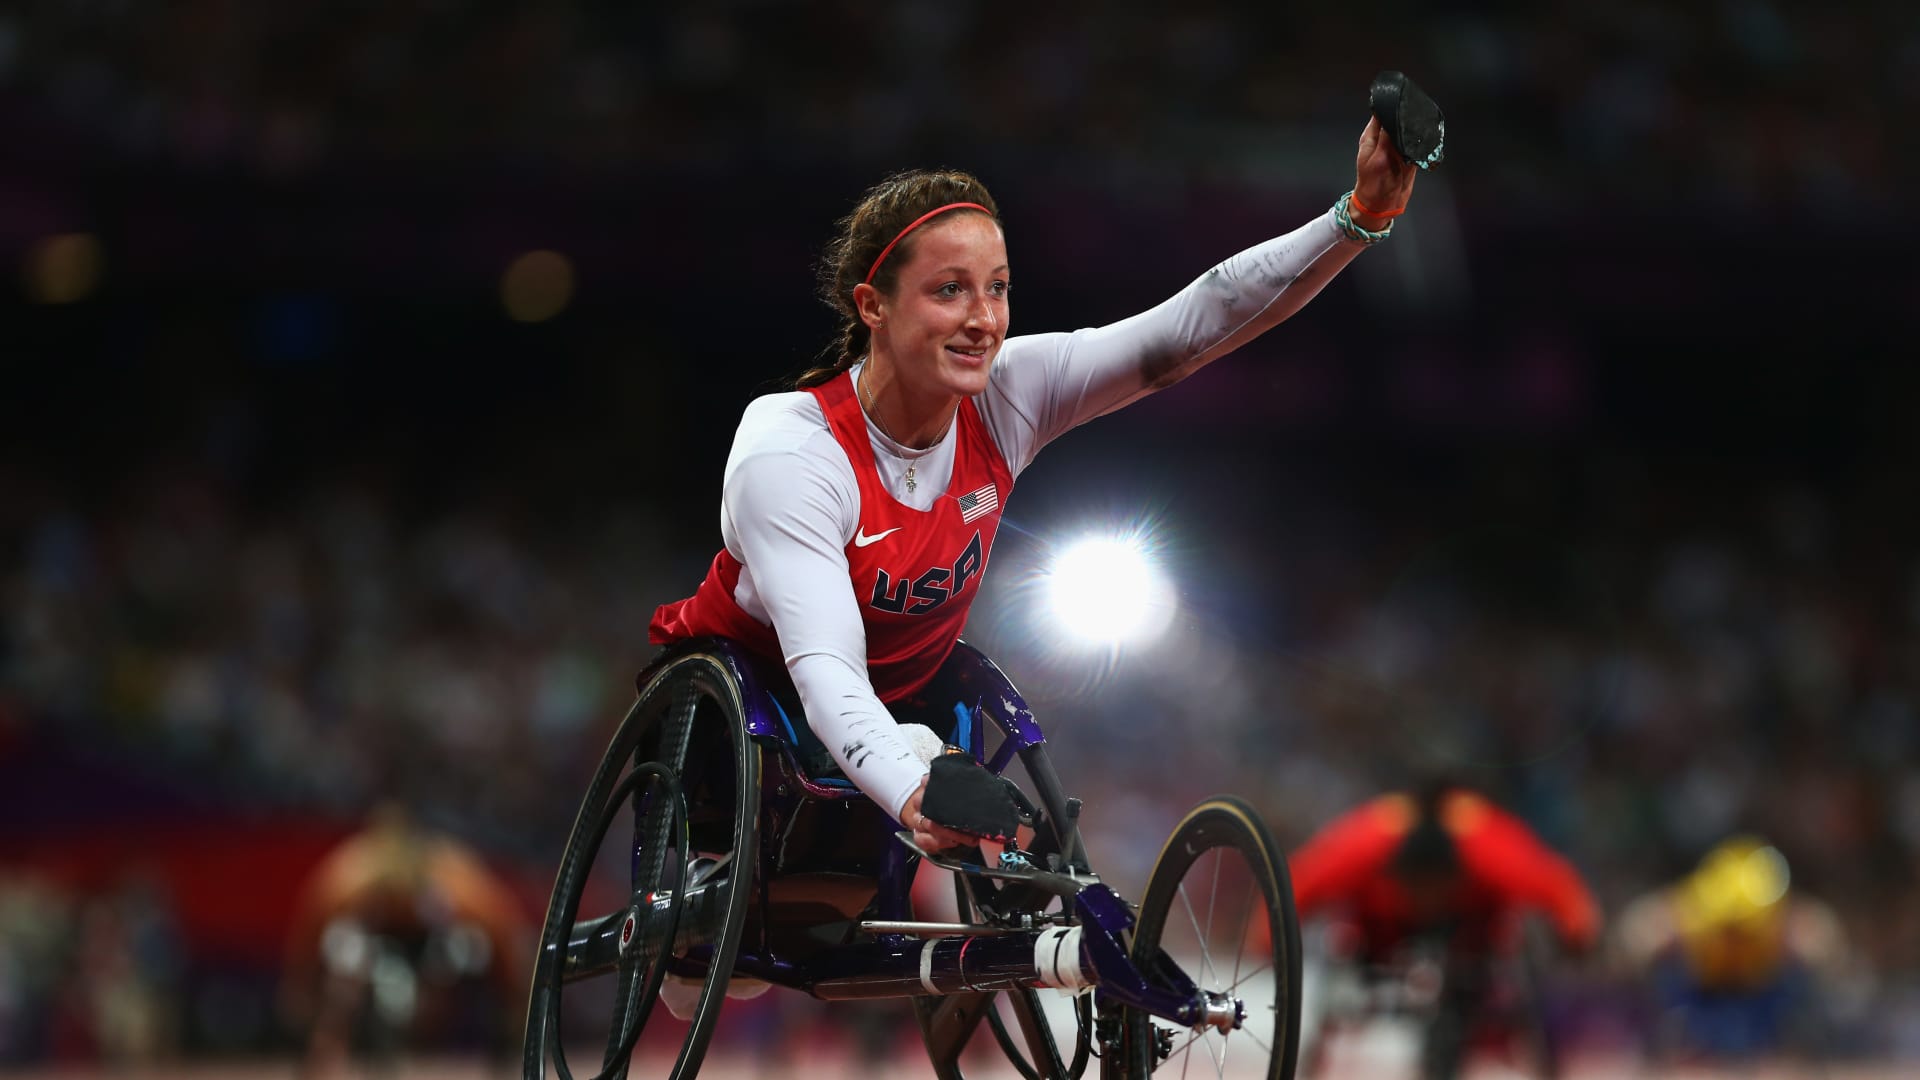 Tatyana Mcfadden of the United States wins gold in the Women's 400m - T54 Final on day 5 of the London 2012 Paralympic Games at Olympic Stadium on September 3, 2012 in London, England. (Photo by Michael Steele/Getty Images)